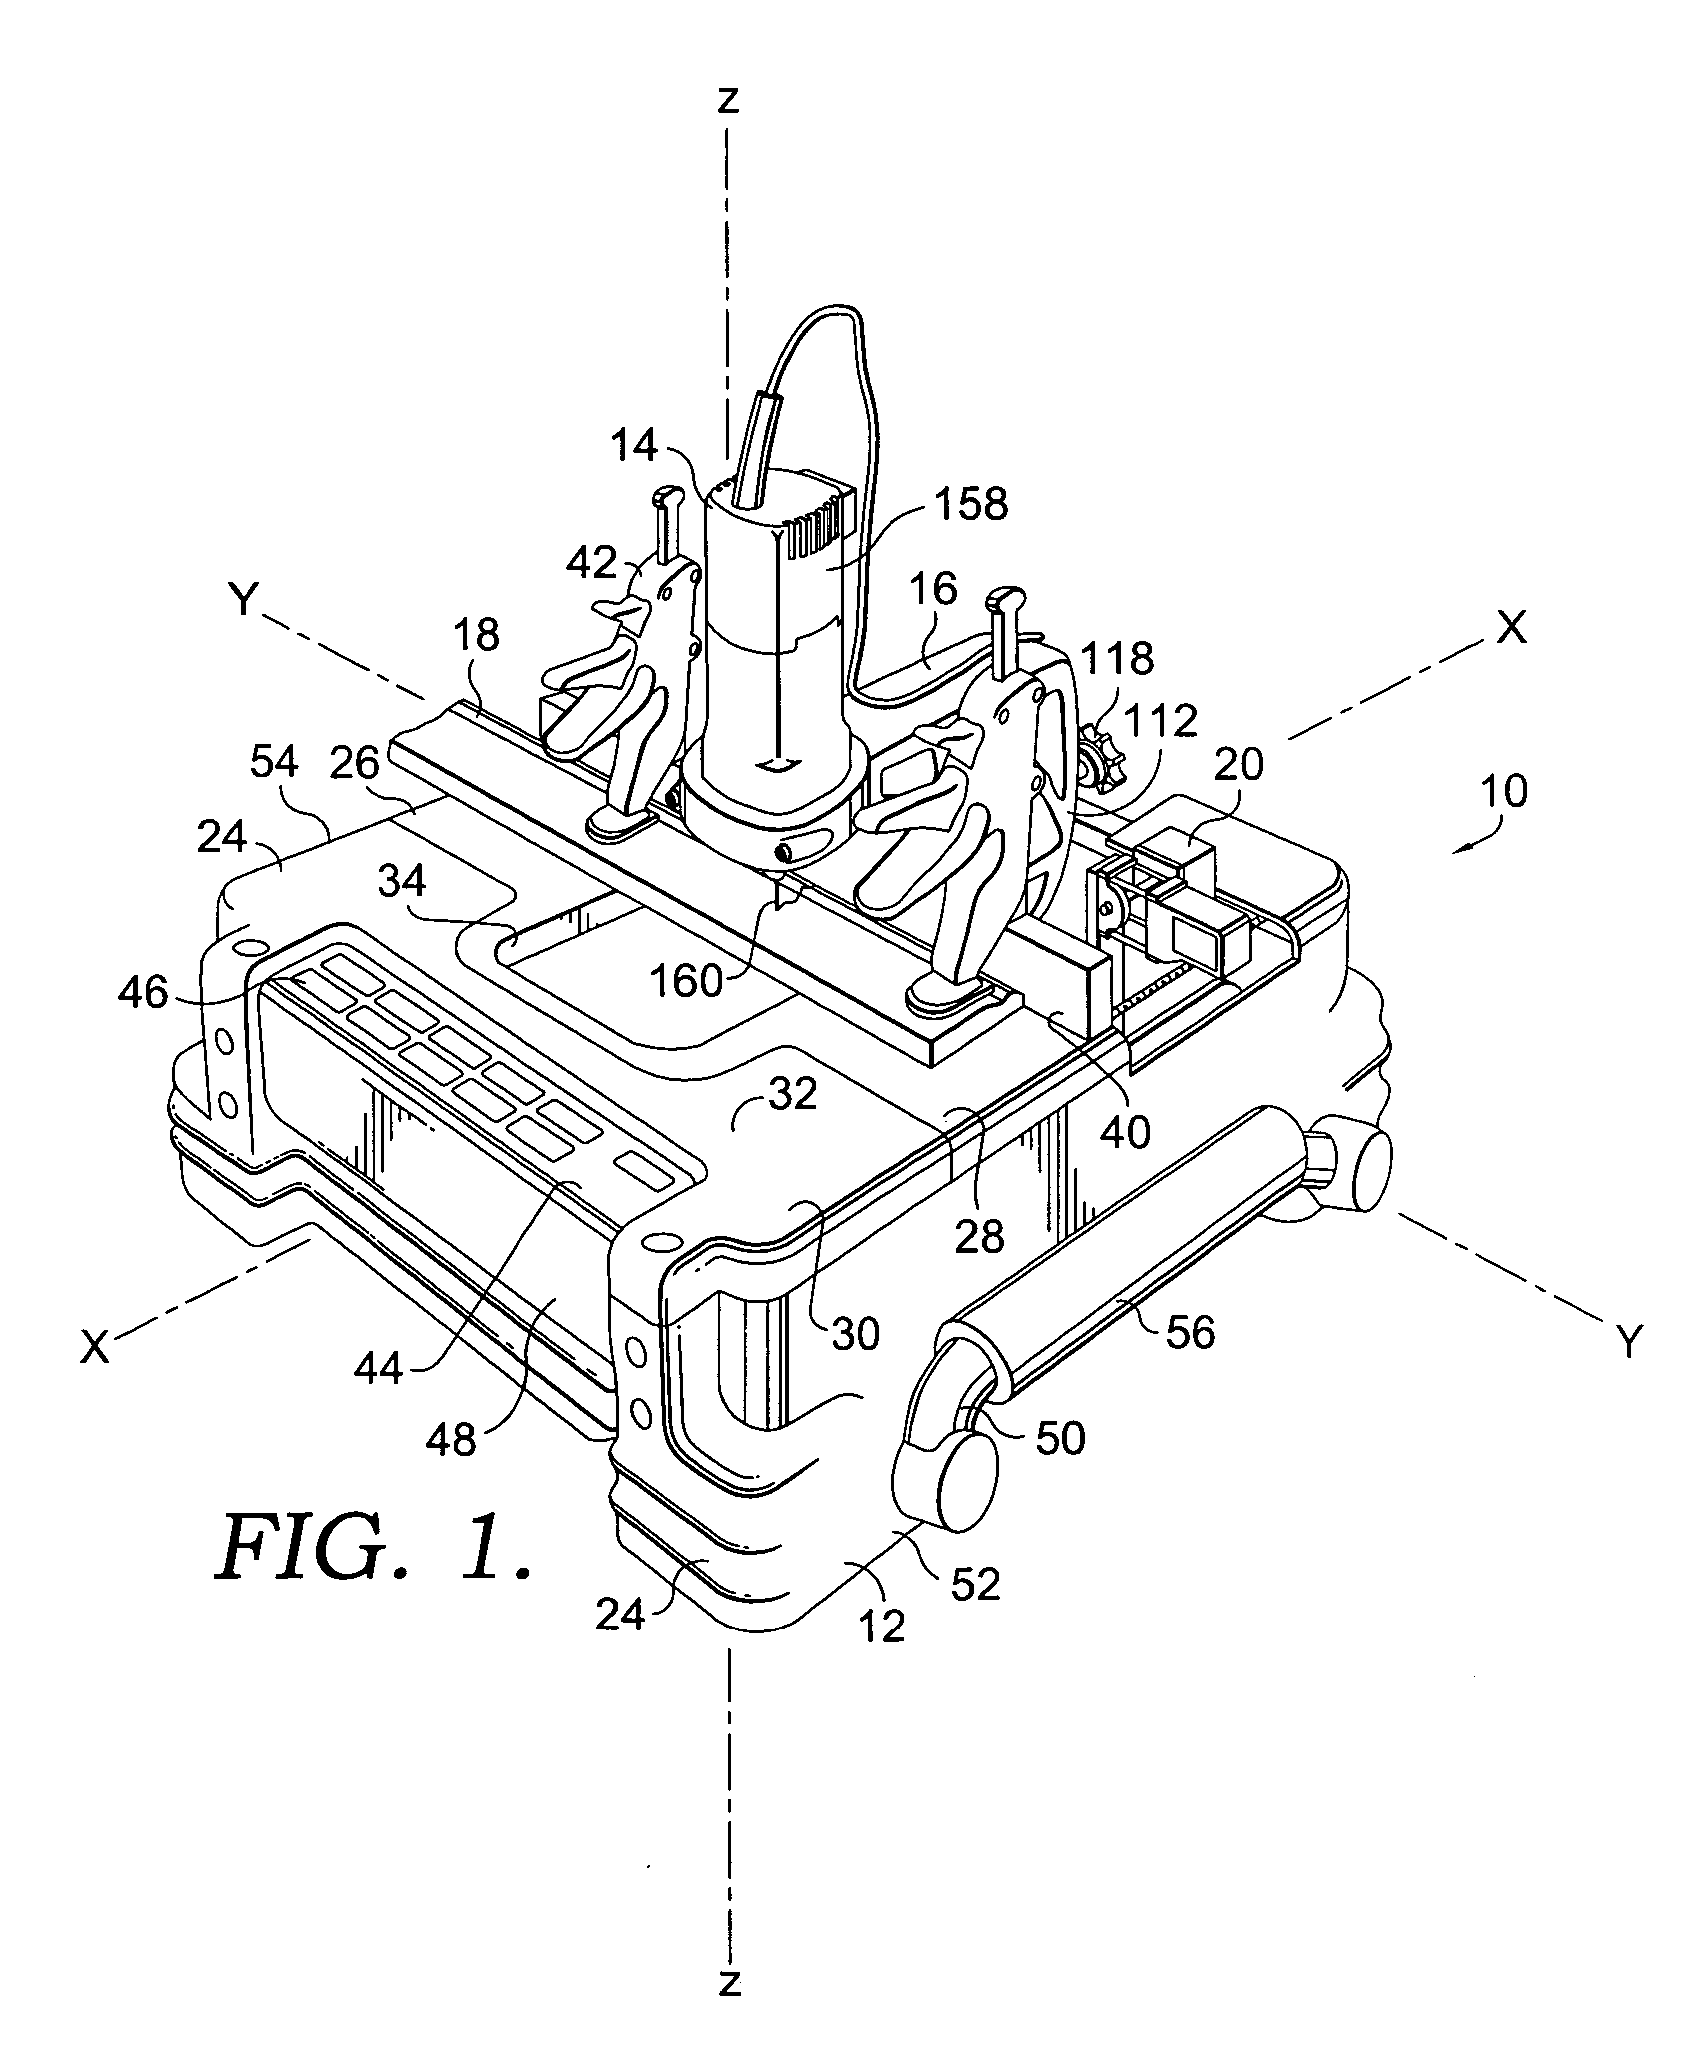 Method and apparatus for cutting a workpiece